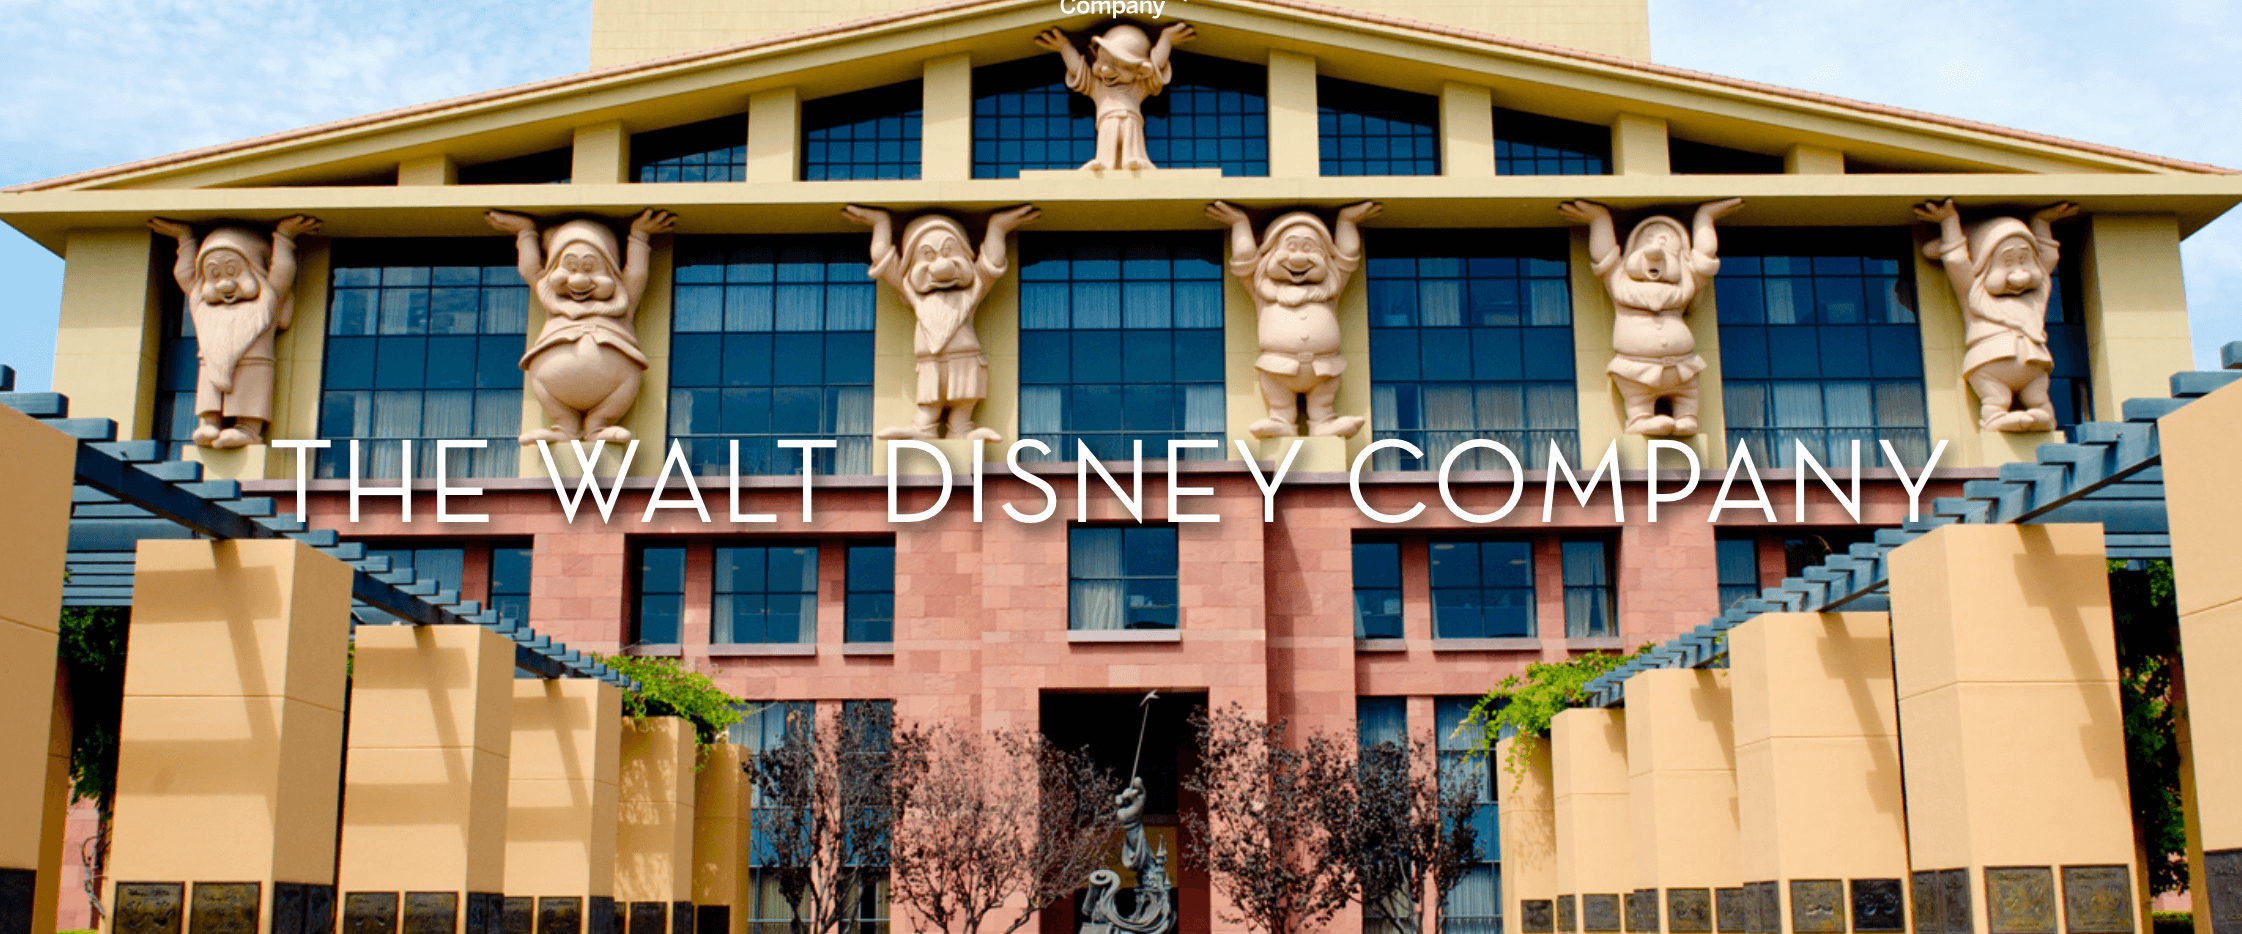 Disney Earnings: 2020 Losses Better than Expected, Disney+ Surges, Stocks Jump